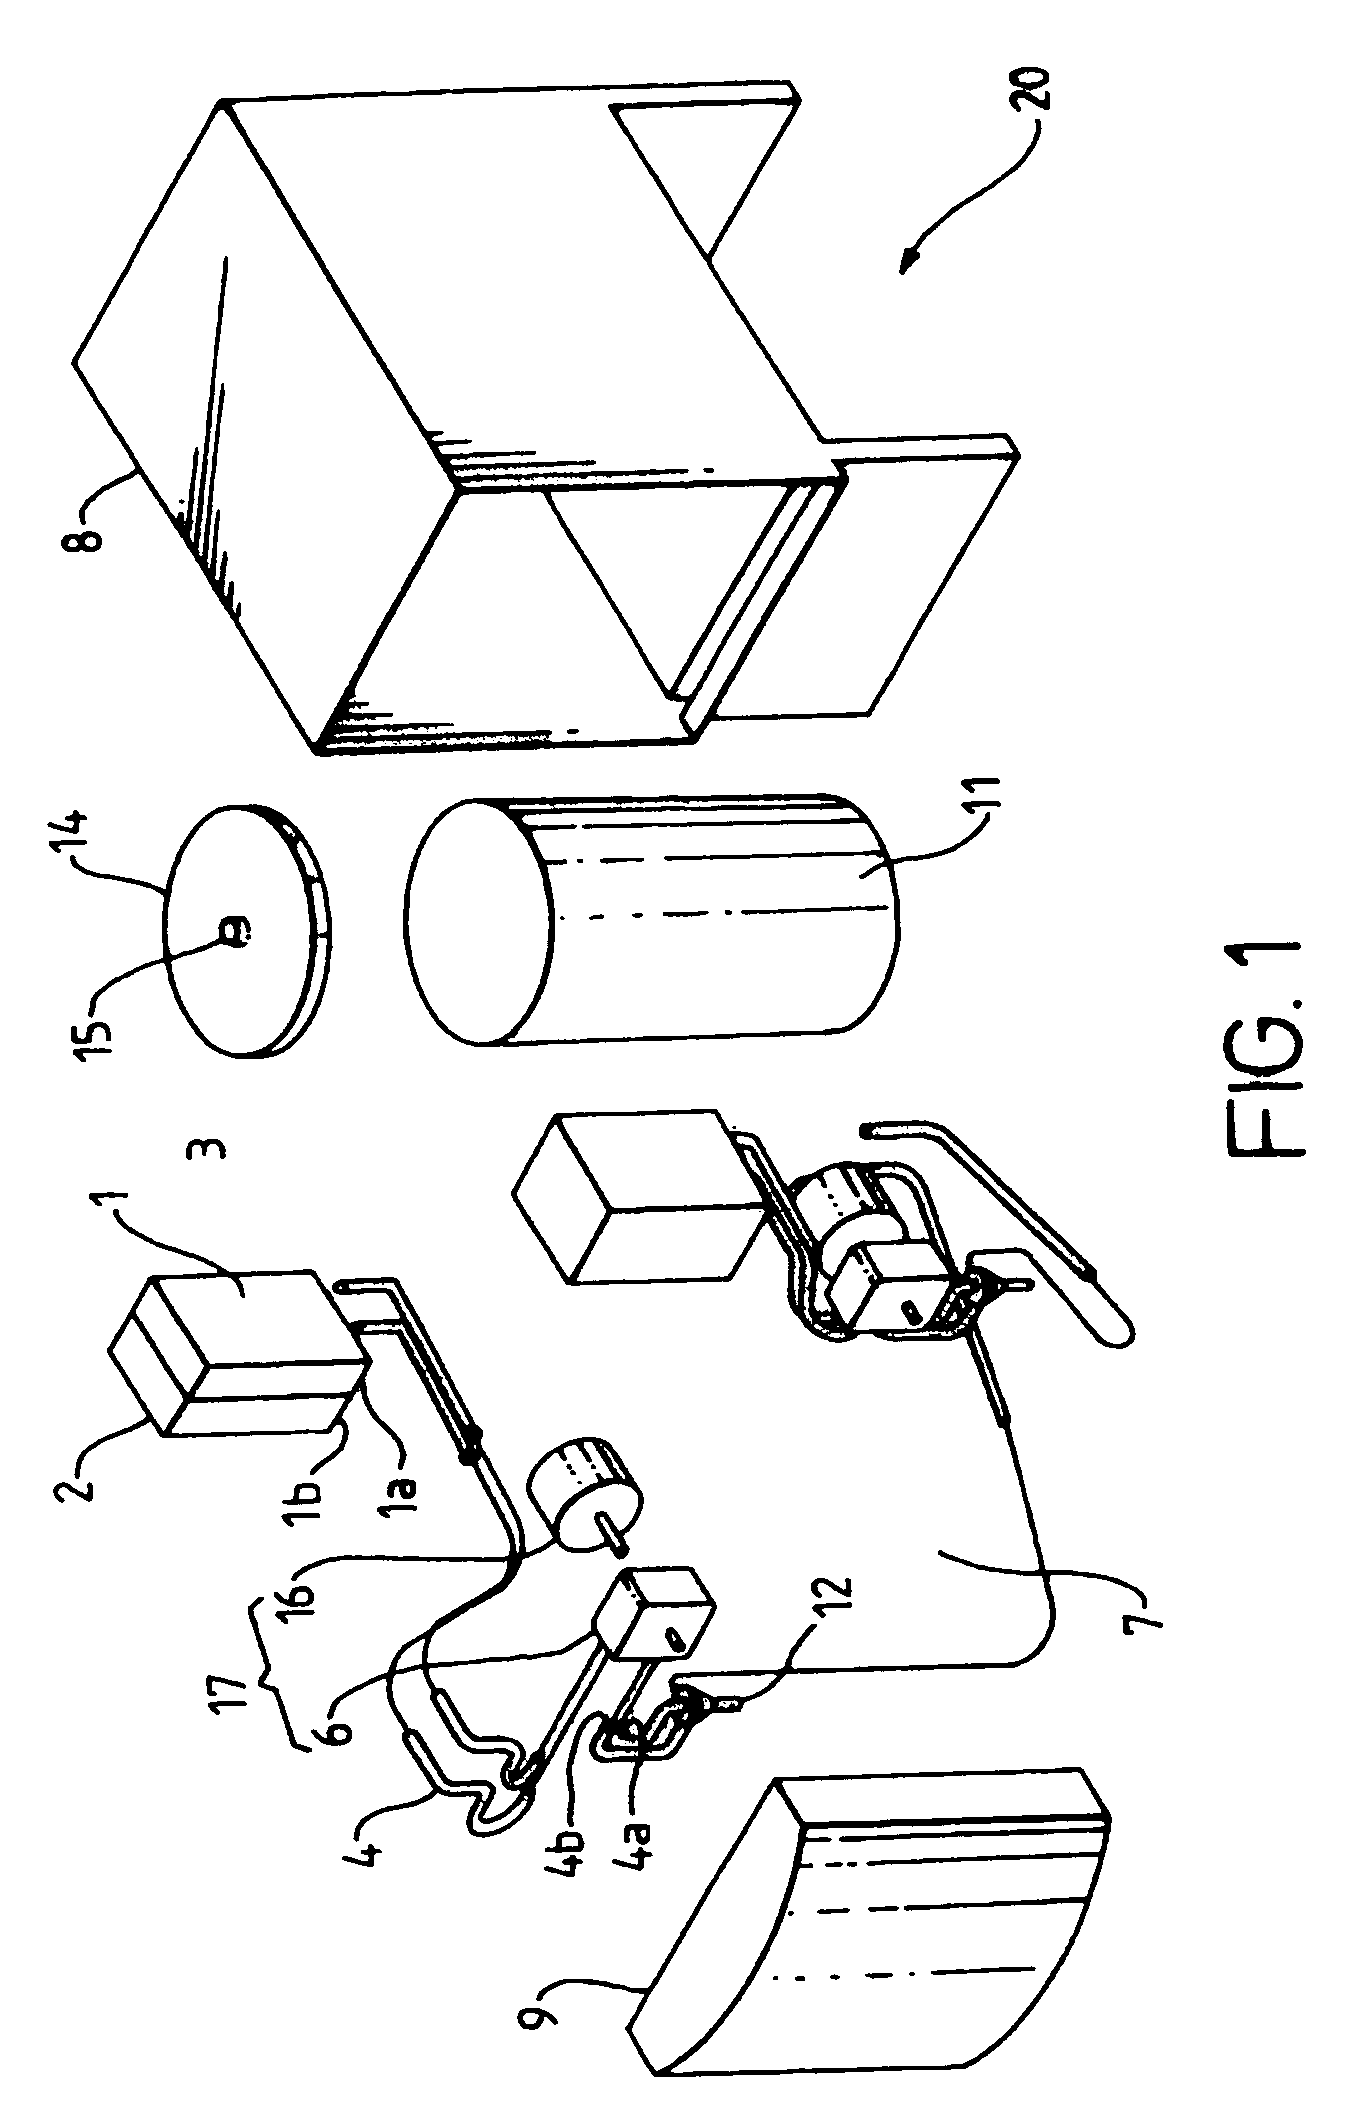 System and method for dispensing a liquid beverage concentrate